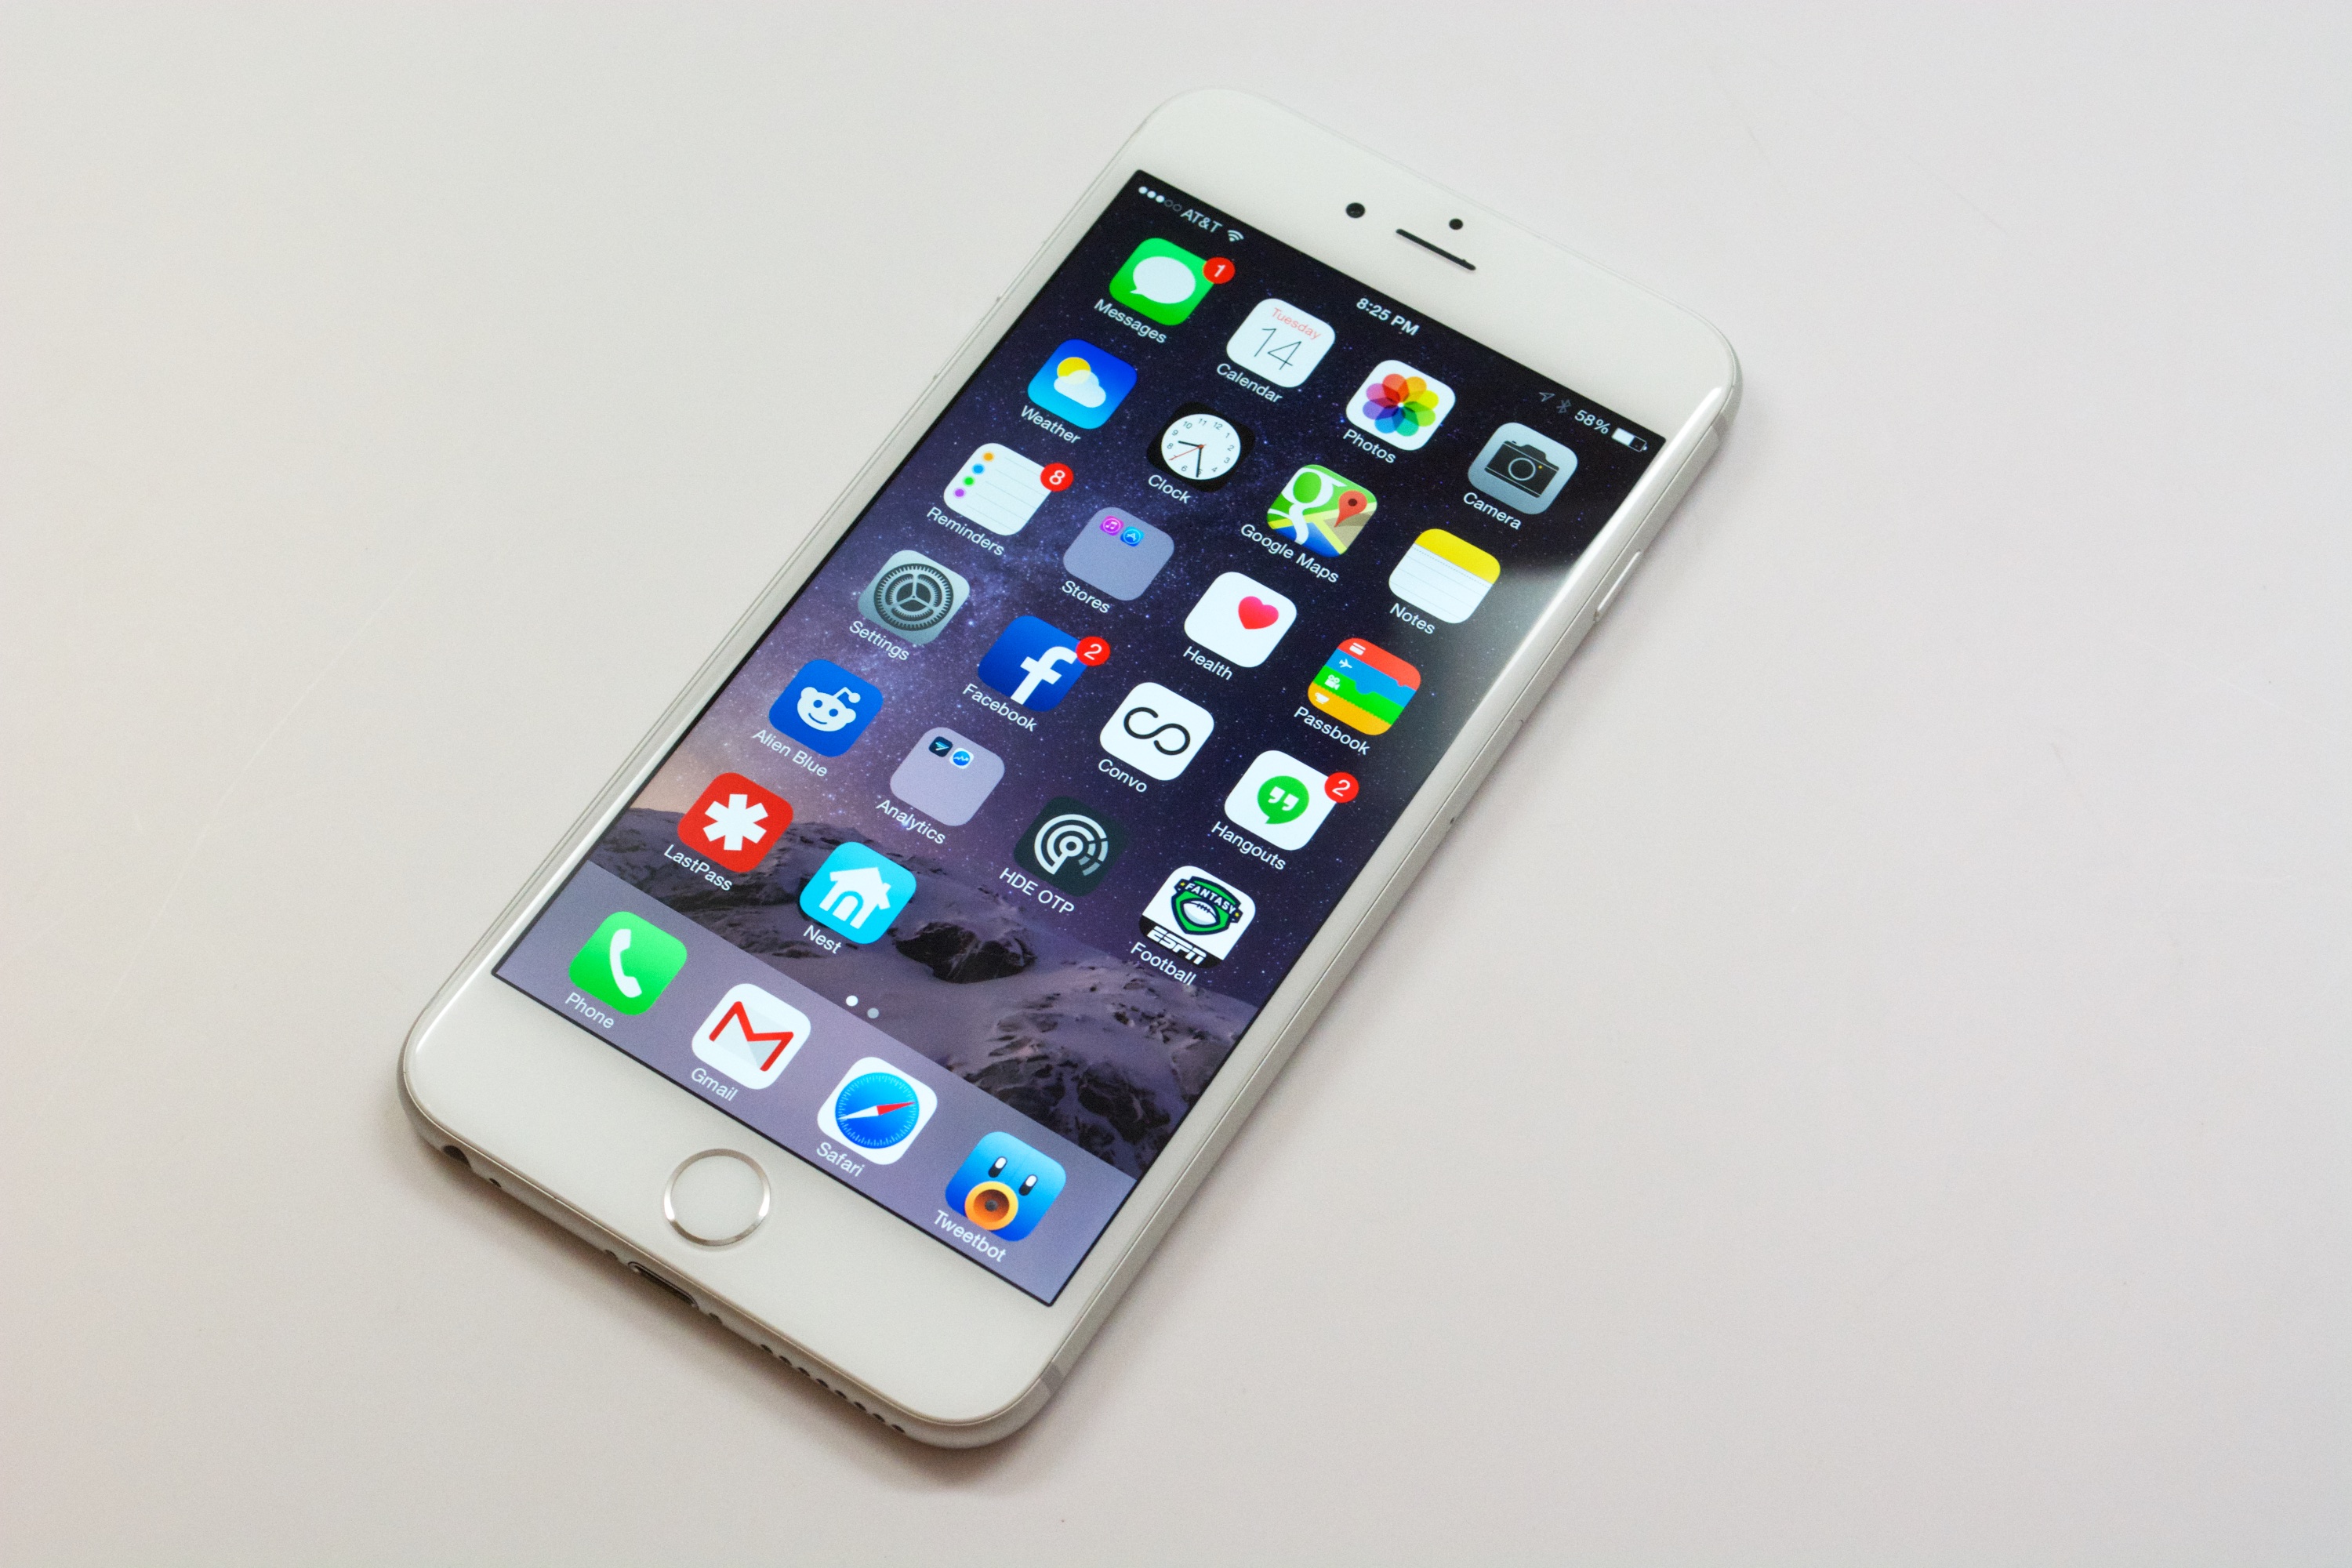 The iPhone 6 Plus display is smaller and lower resolution than the Nexus 6.